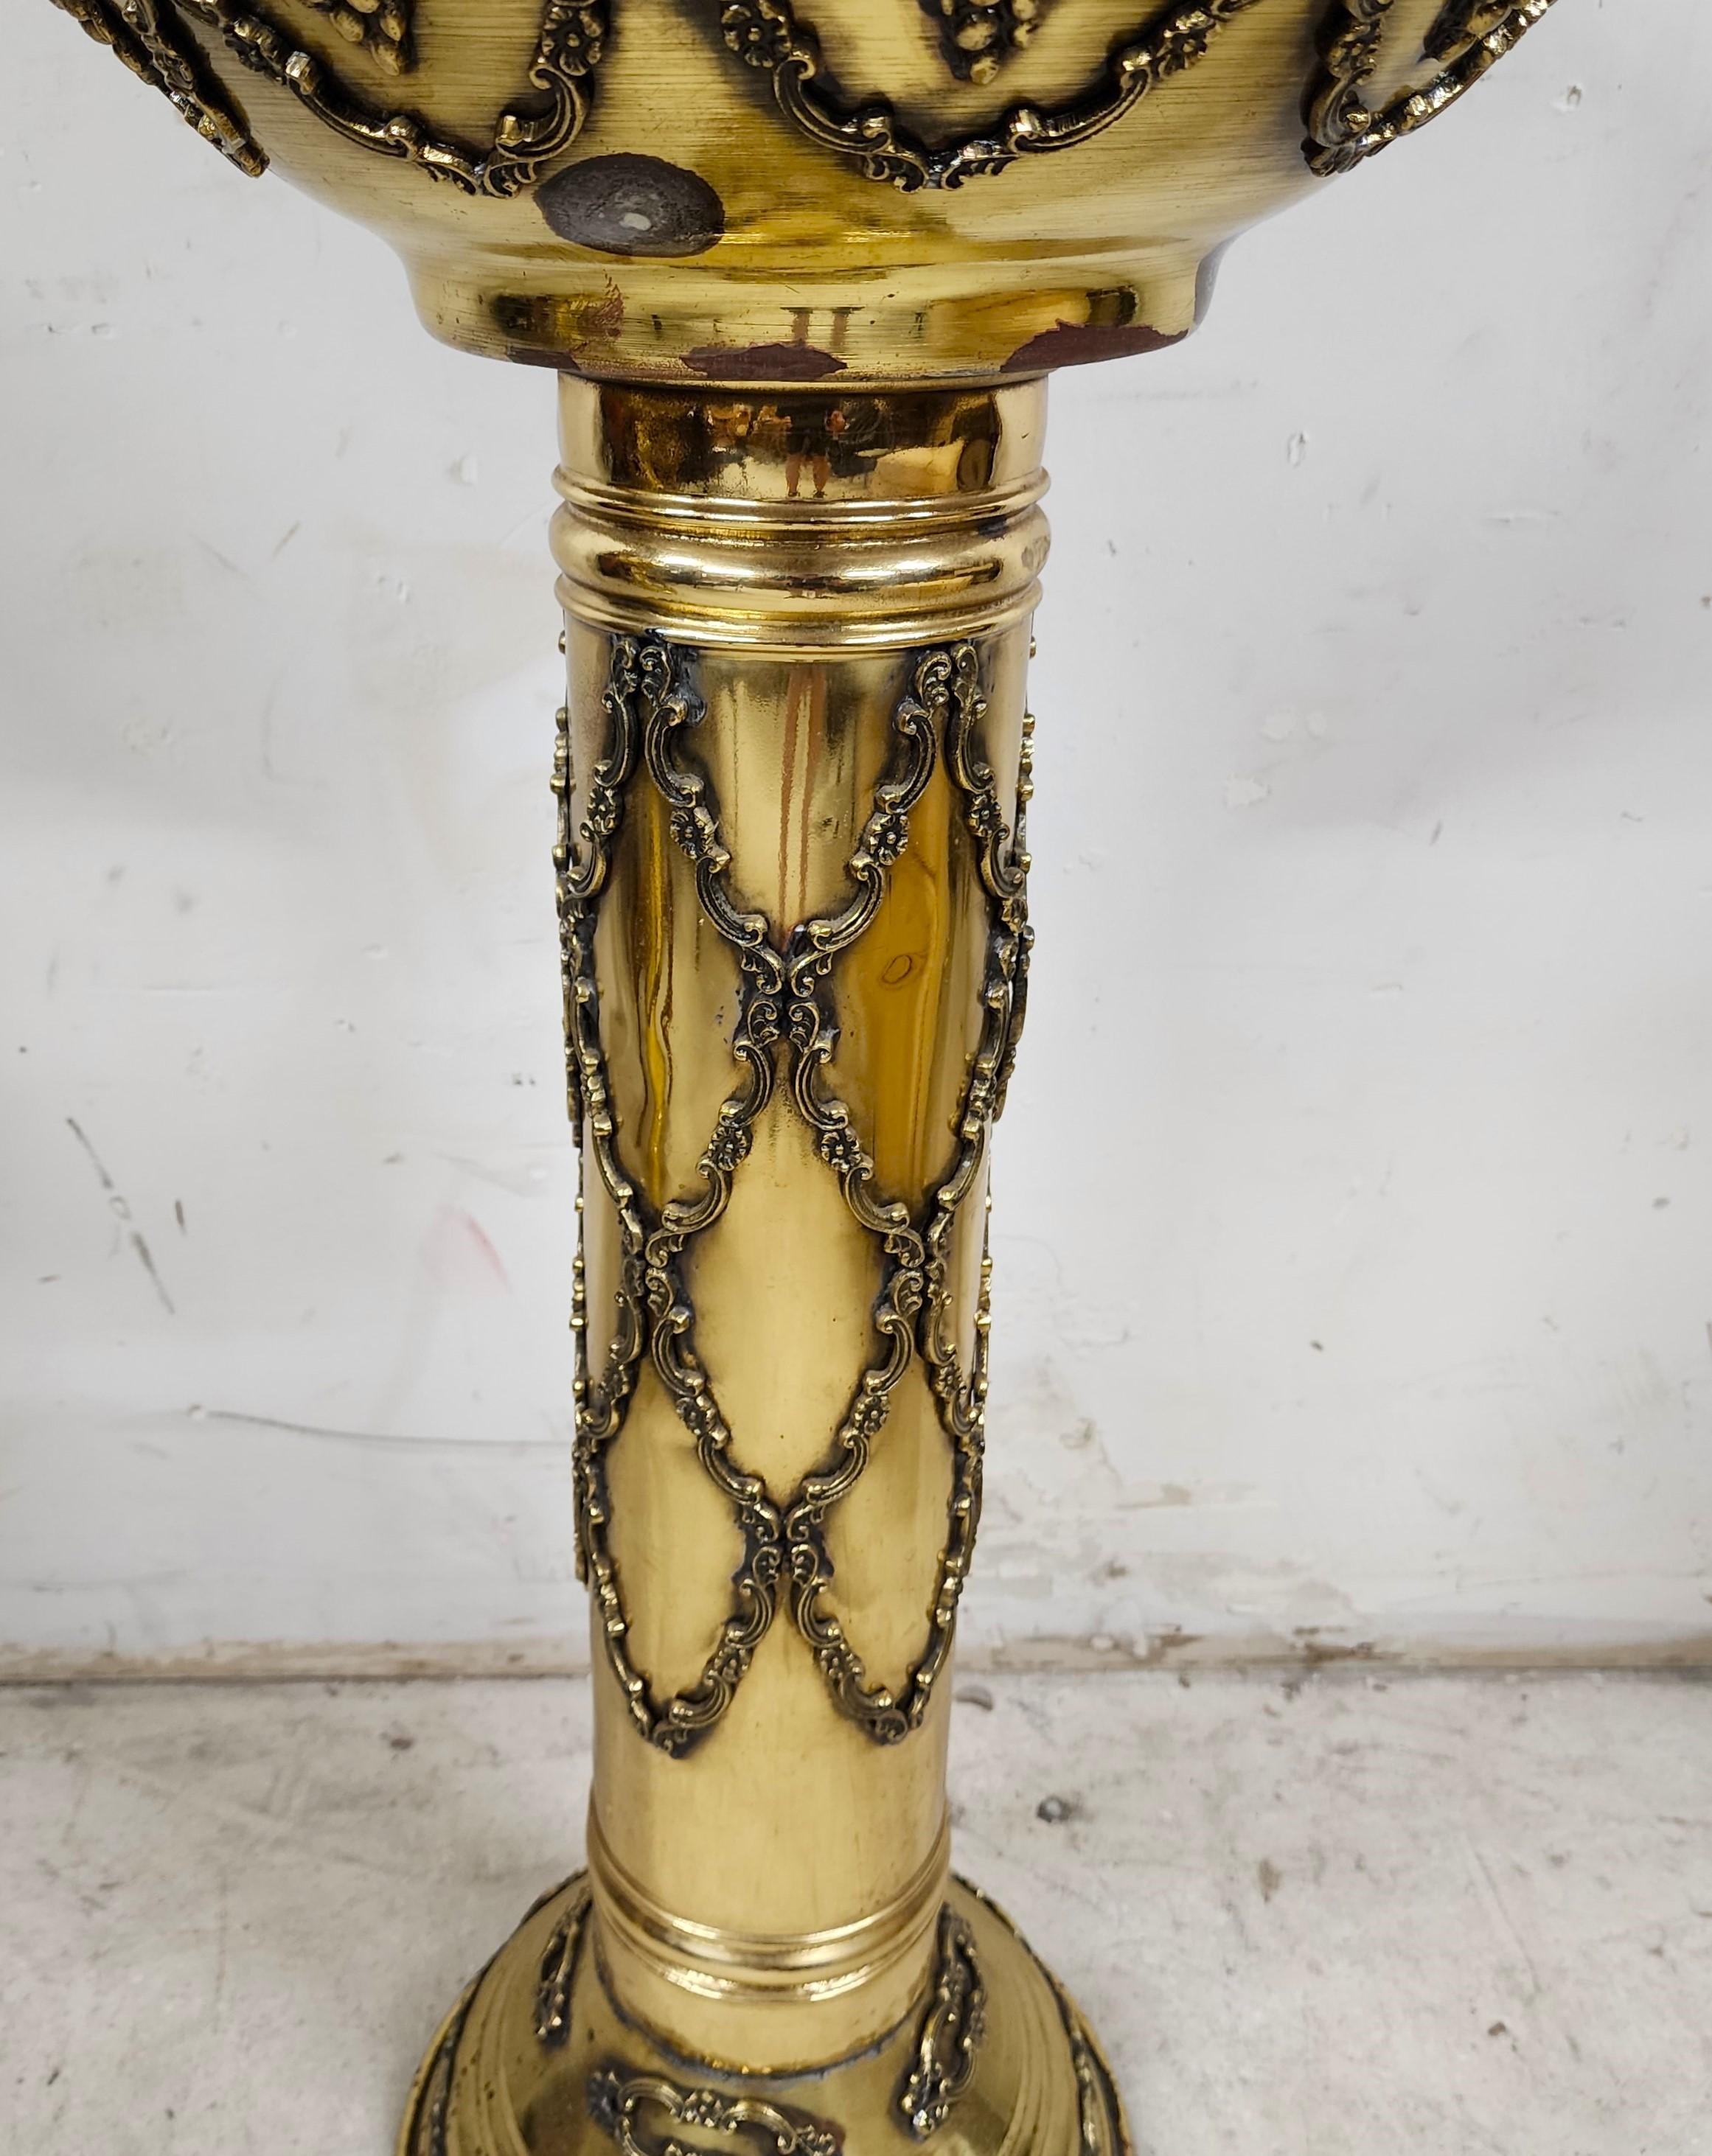 Antique Ornate Pedestal Brass Planter Stands, Set of 2 In Good Condition For Sale In Lake Worth, FL